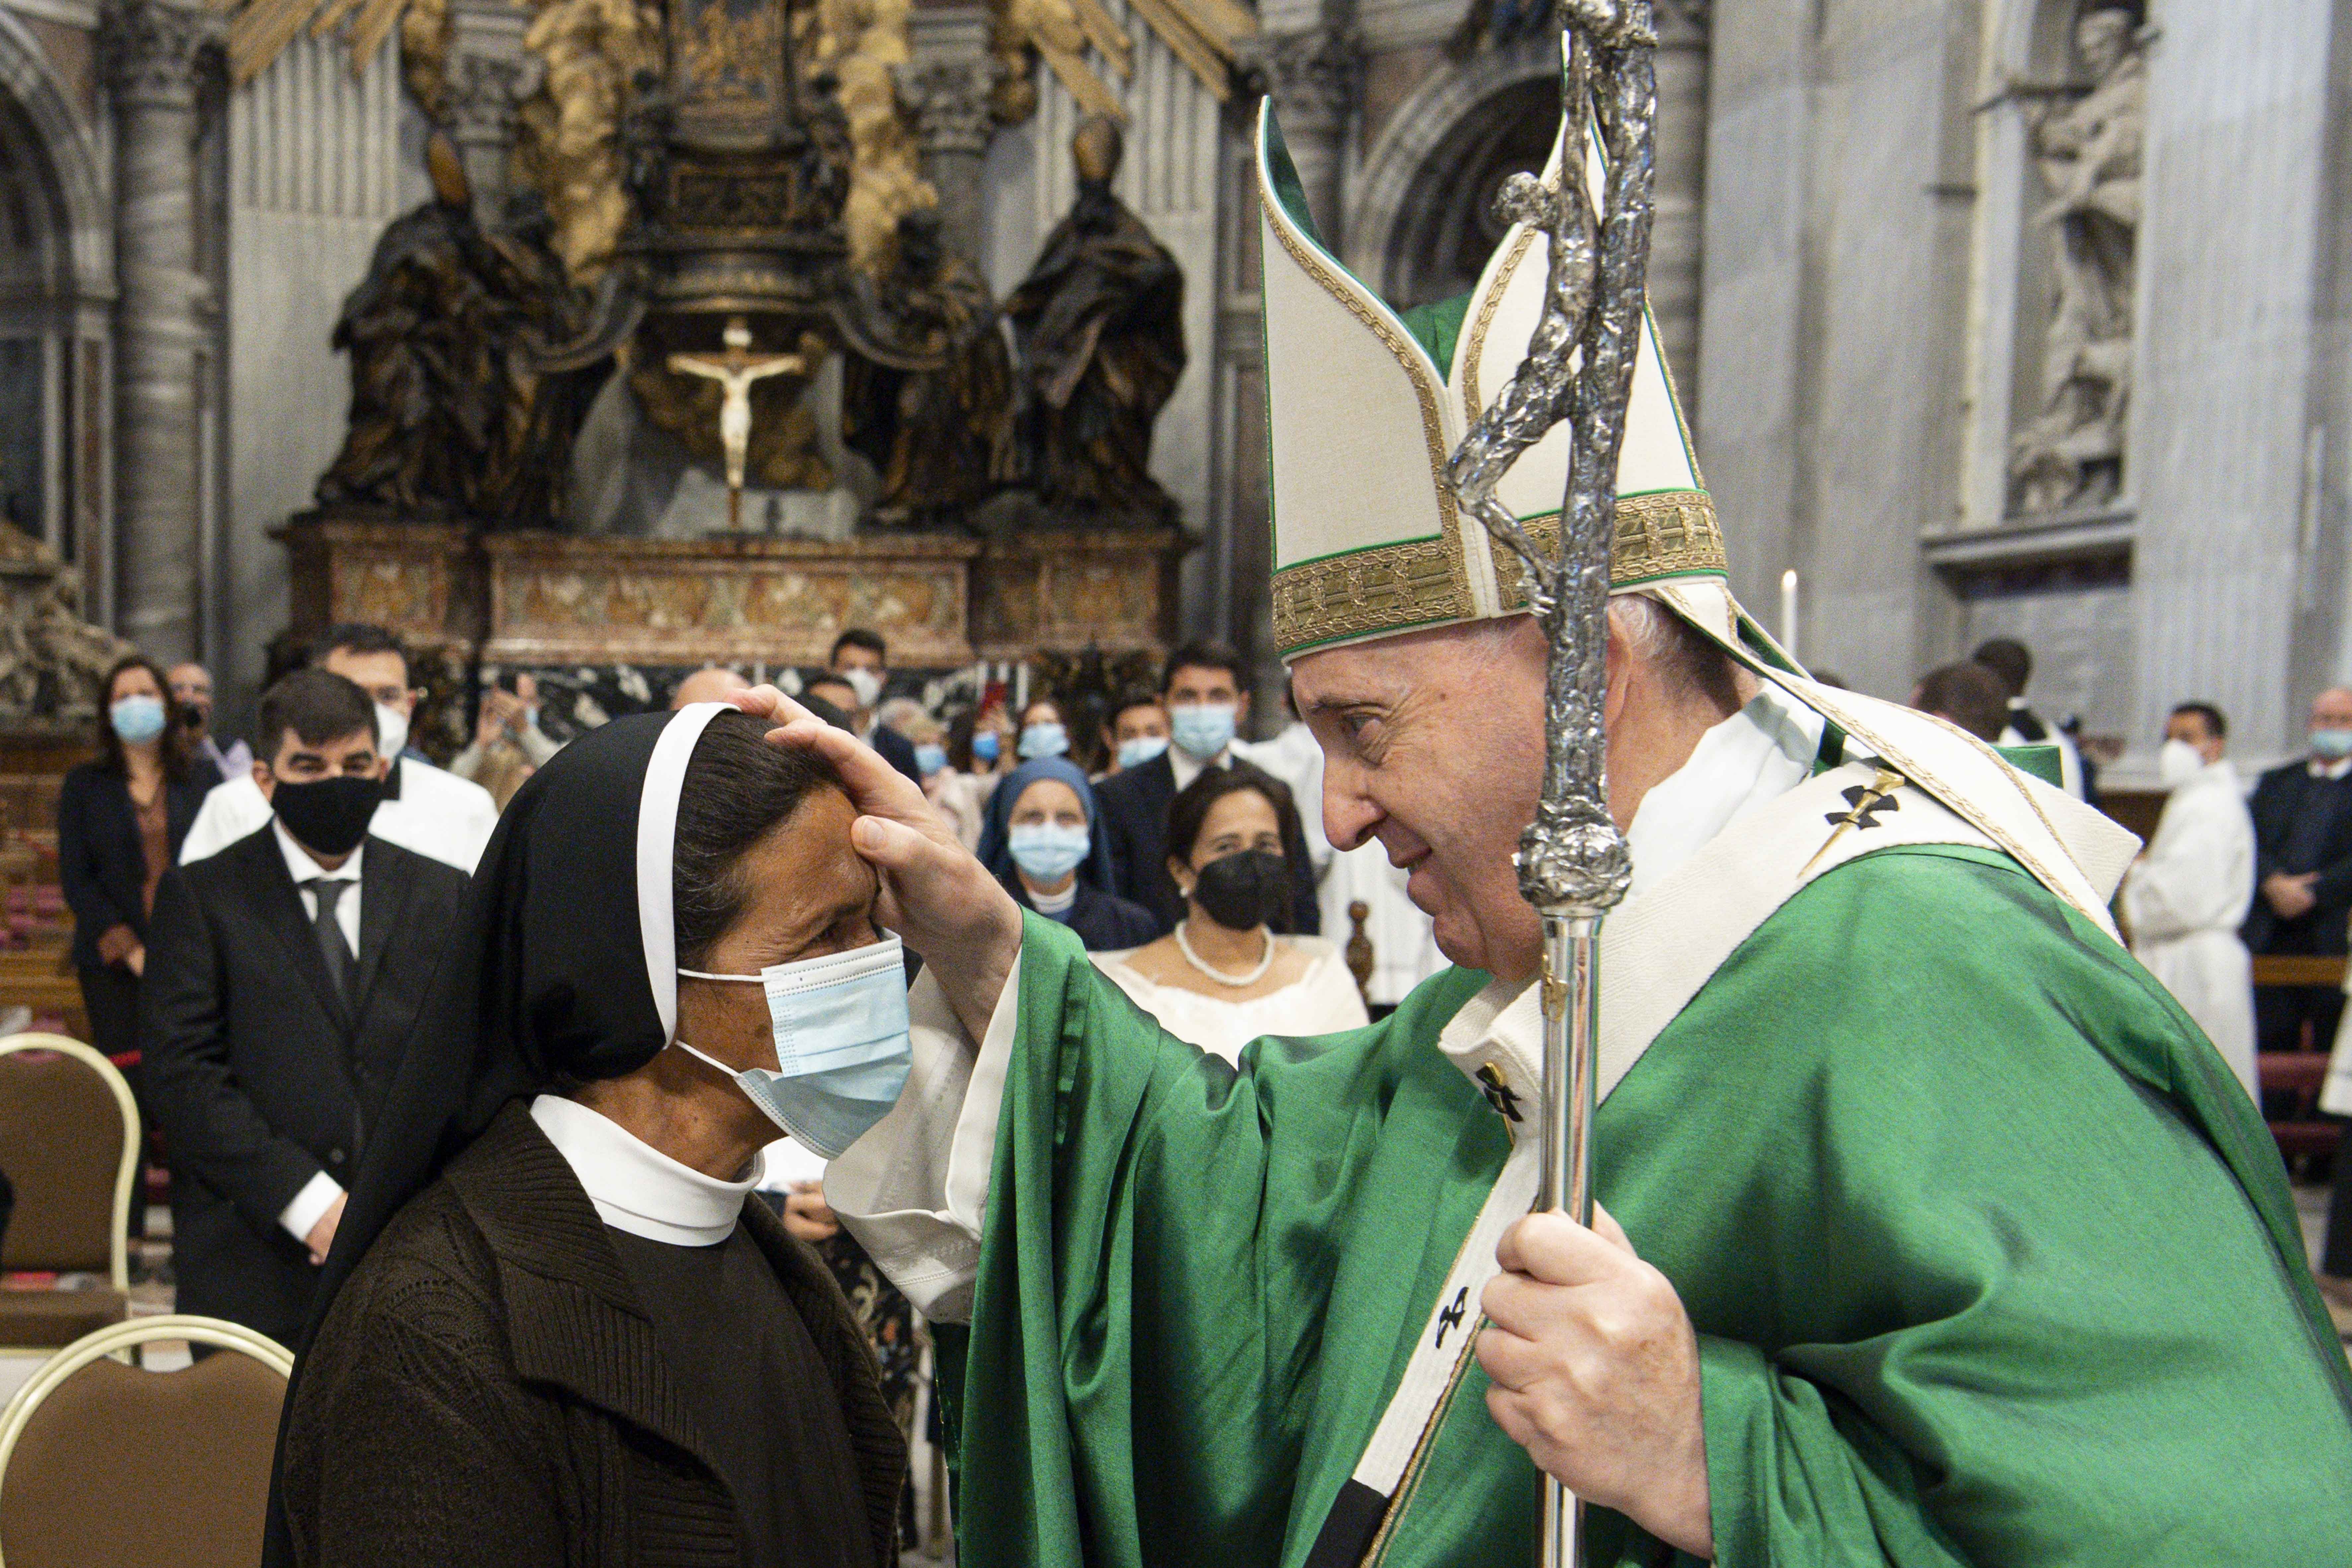 Pope Francis blesses Sister Gloria Cecilia Narváez Argot, a member of the Franciscan Sisters of Mary Immaculate, at the end of Mass in St. Peter's Basilica at the Vatican Oct. 10, 2021. The sister, a missionary from Colombia, was kidnapped in Mali in 2017